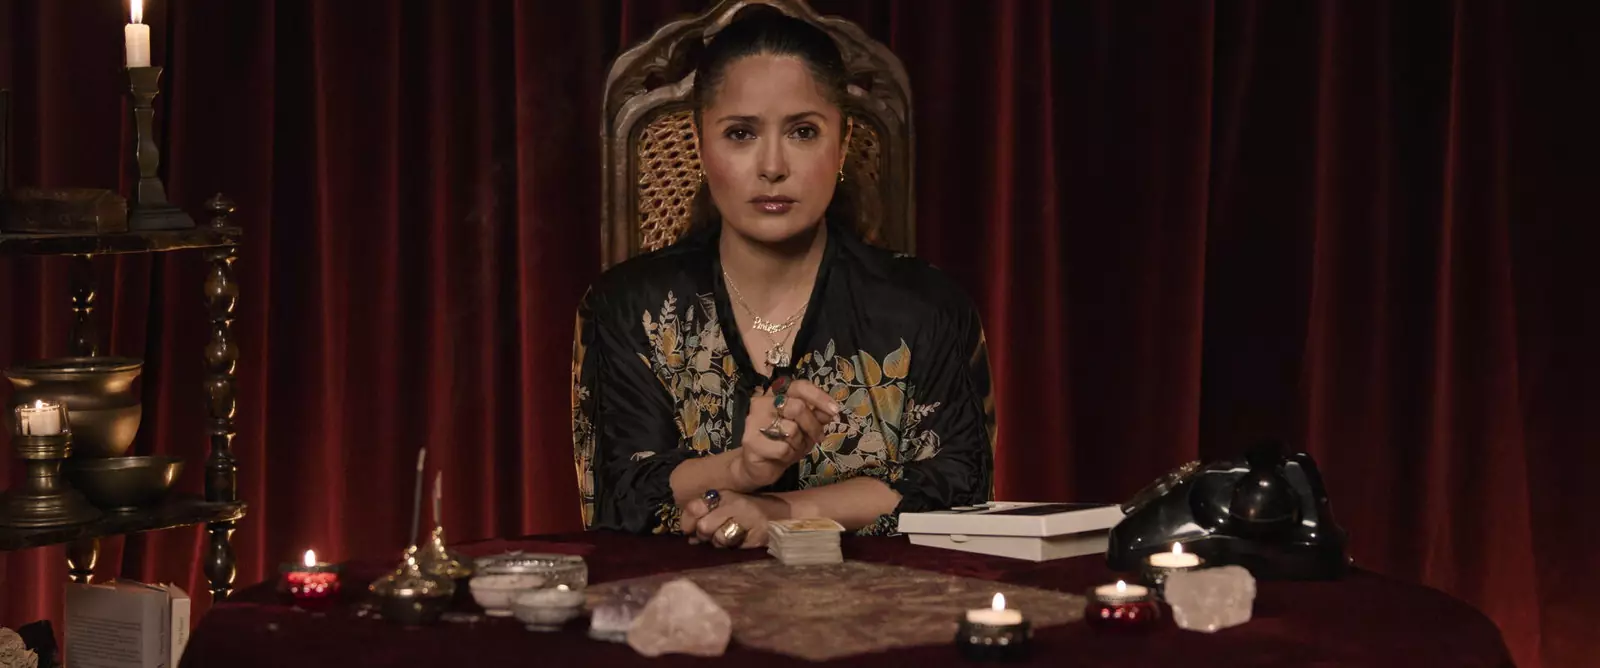 Salma Hayek played Pina Auremma, a fortune teller who became Reggiani's advisor and close friend.  It was she who helped Patricia order the murder of her husband.